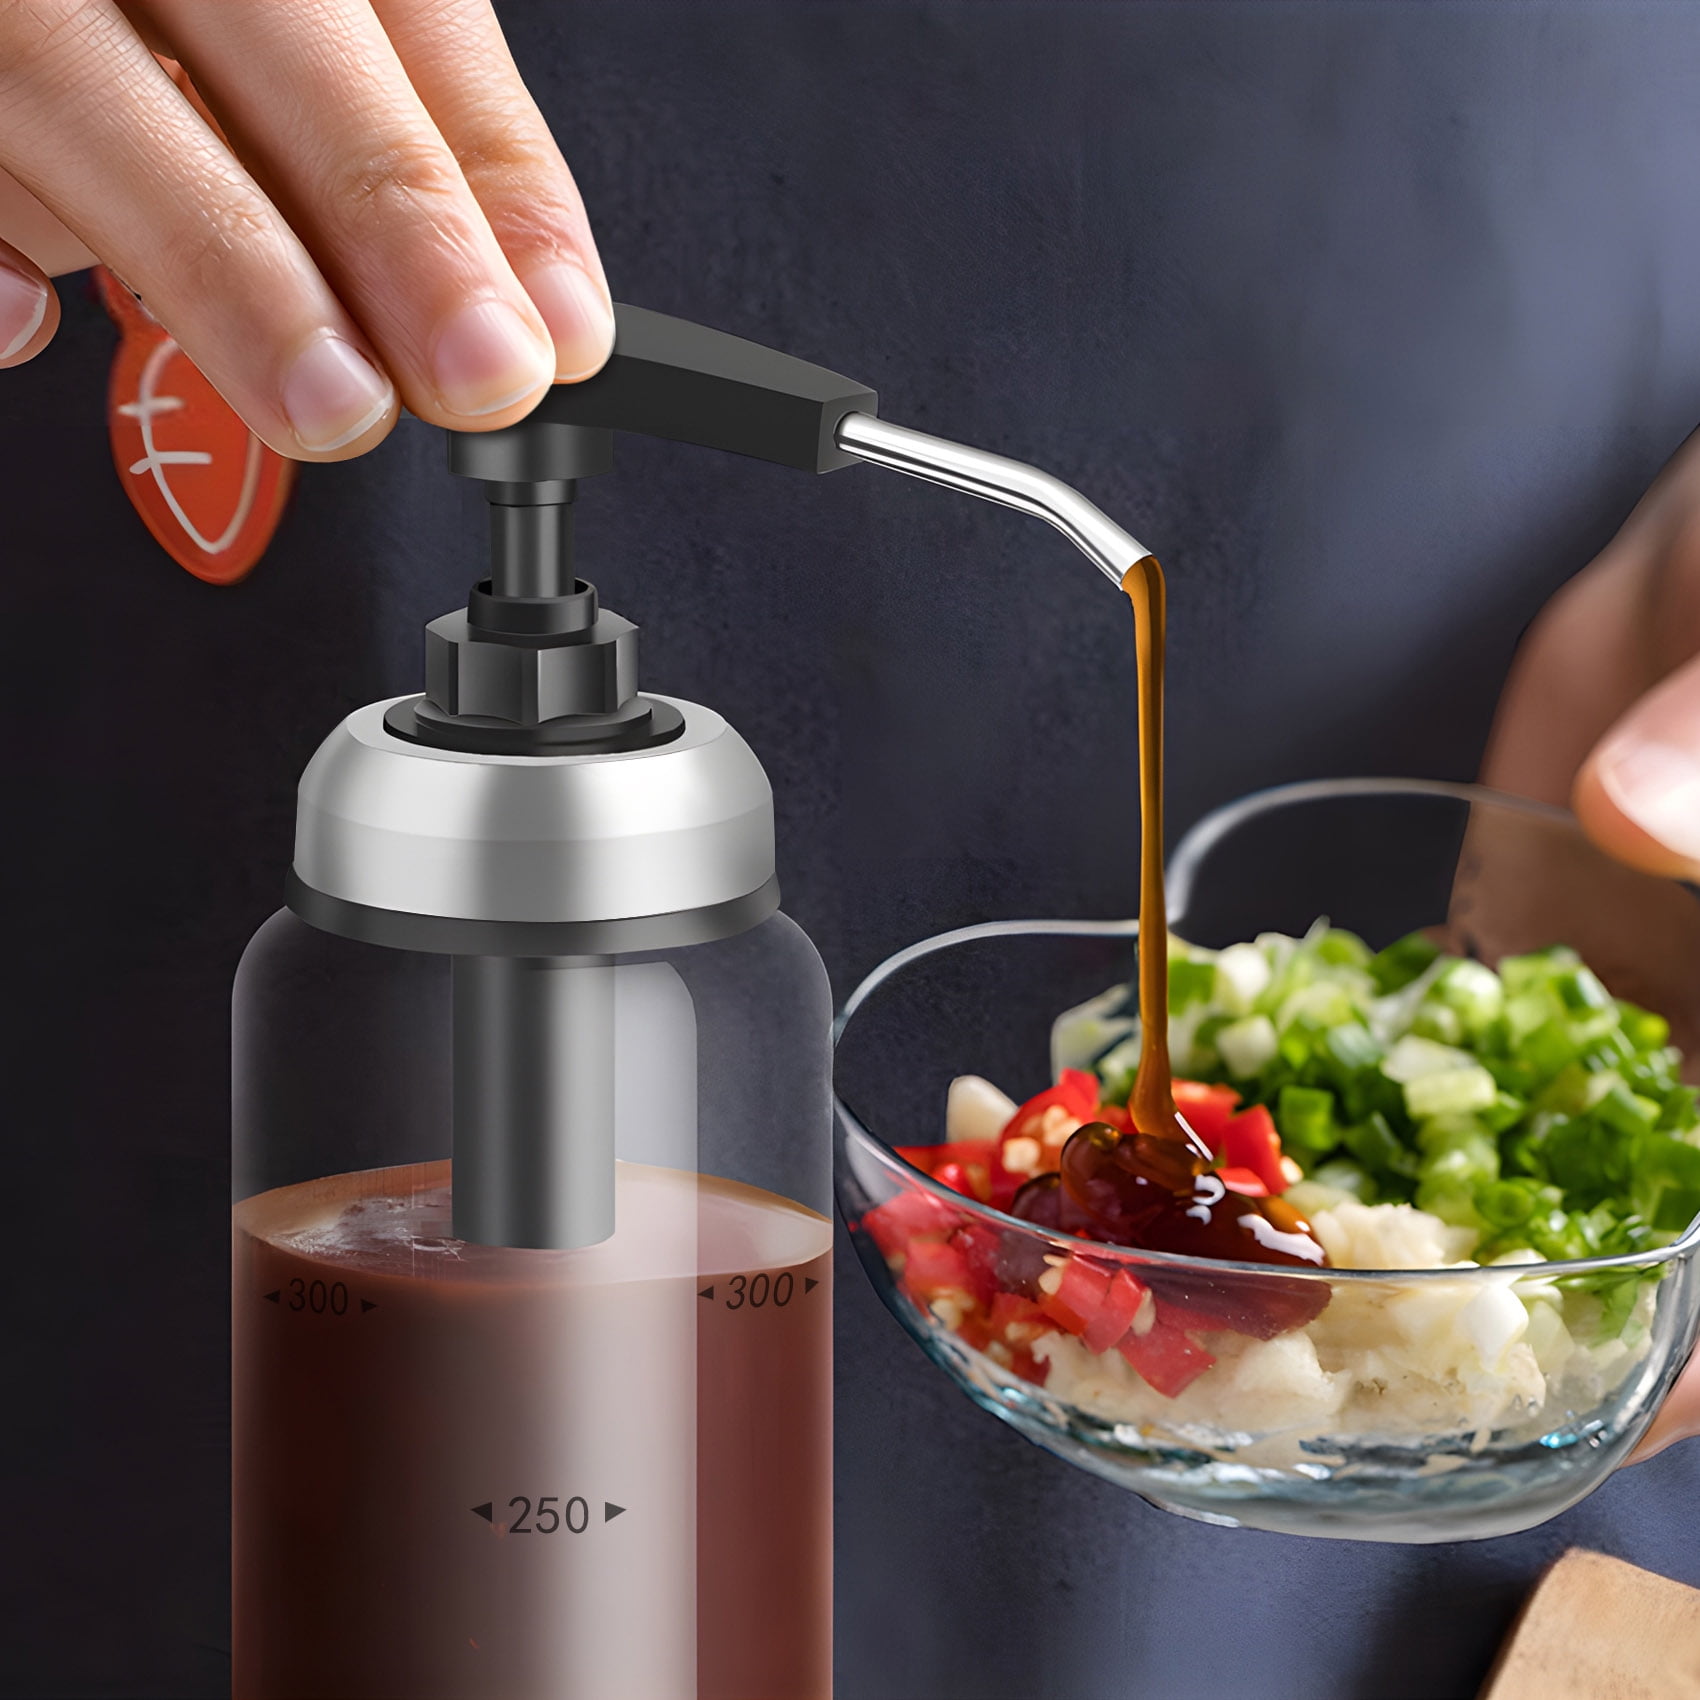  TOSSOW Sauce Pump Dispenser With Glass Bottle 300ML/10oz Olive  Oil Dispenser with Hot Sauce,Tabasco Sauce, Soy Sauce, Ketchup and Salad  Dressing Container for Home Kitchen : Home & Kitchen